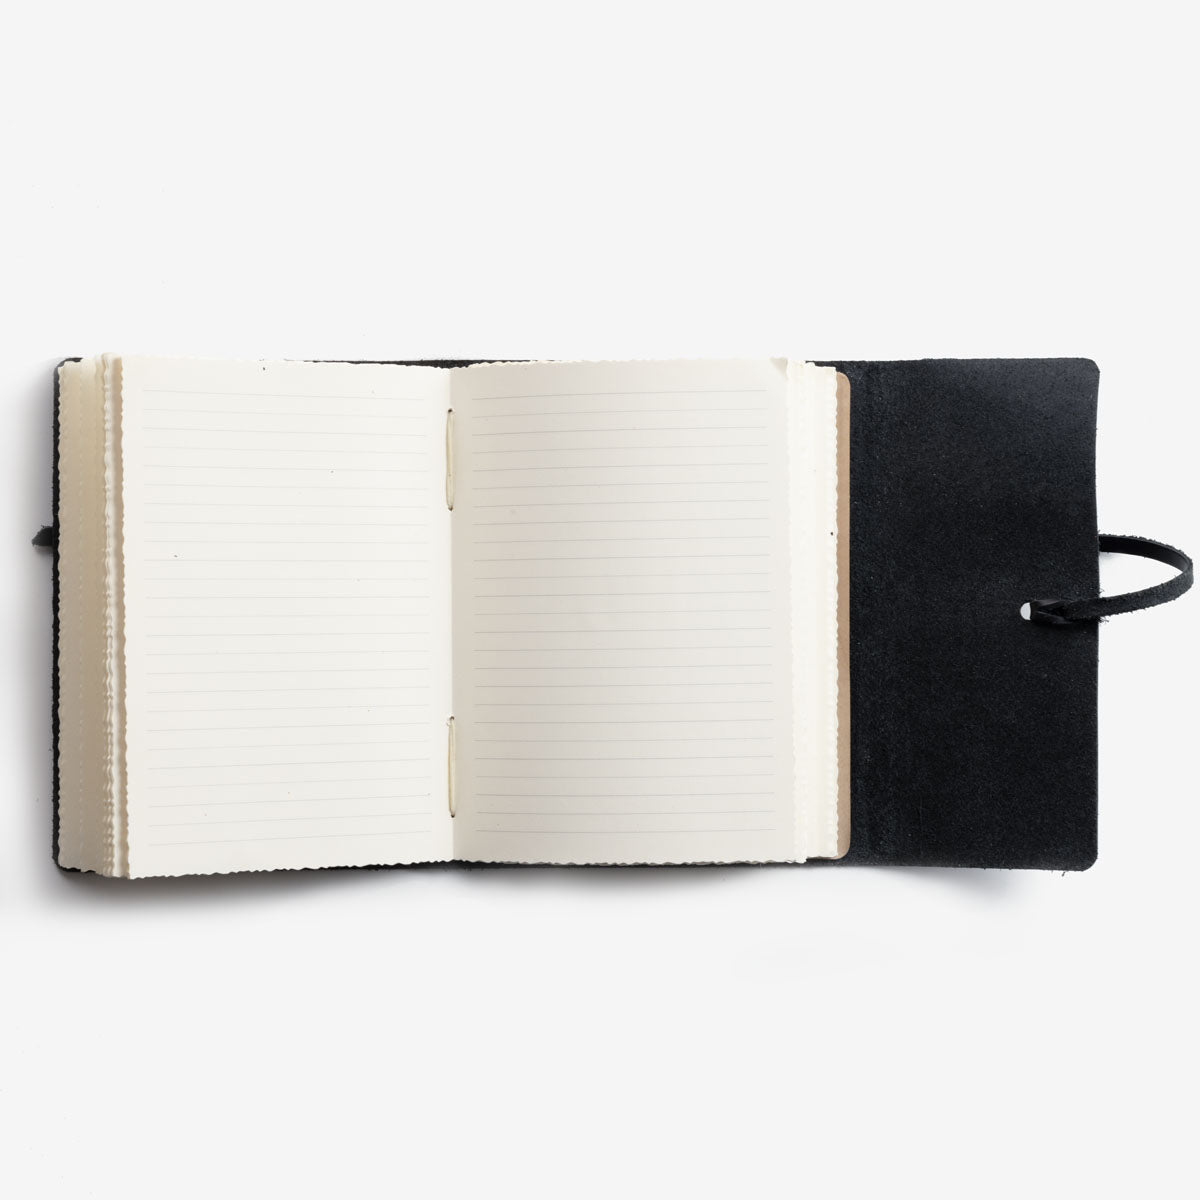 6 Week Journal Mastery Course + Leather Journal